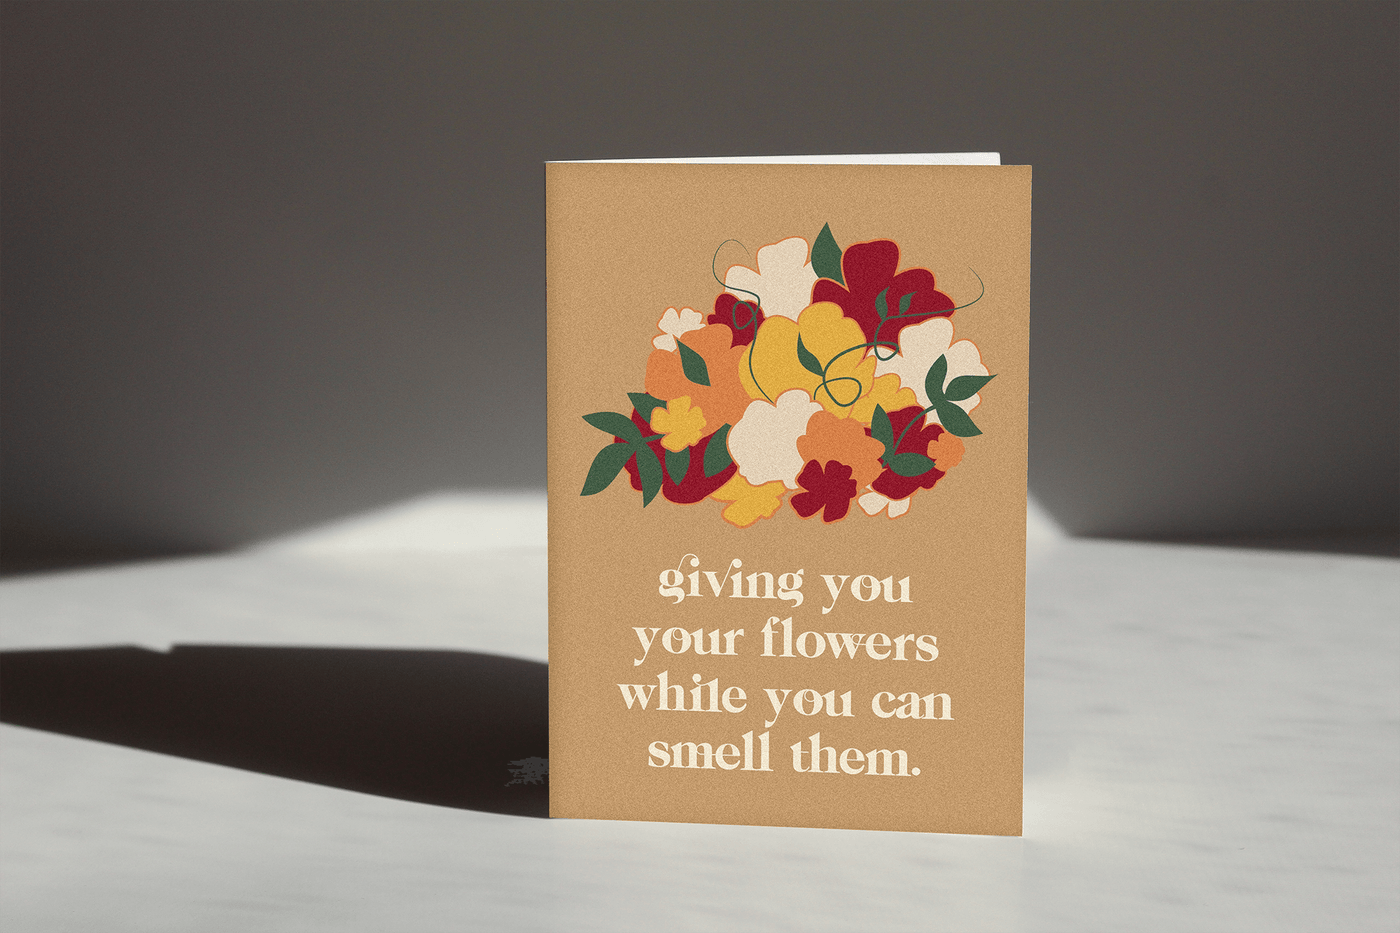 sand colored card that reads "giving you flowers while you can smell them" with an illustration of a flower bouquet